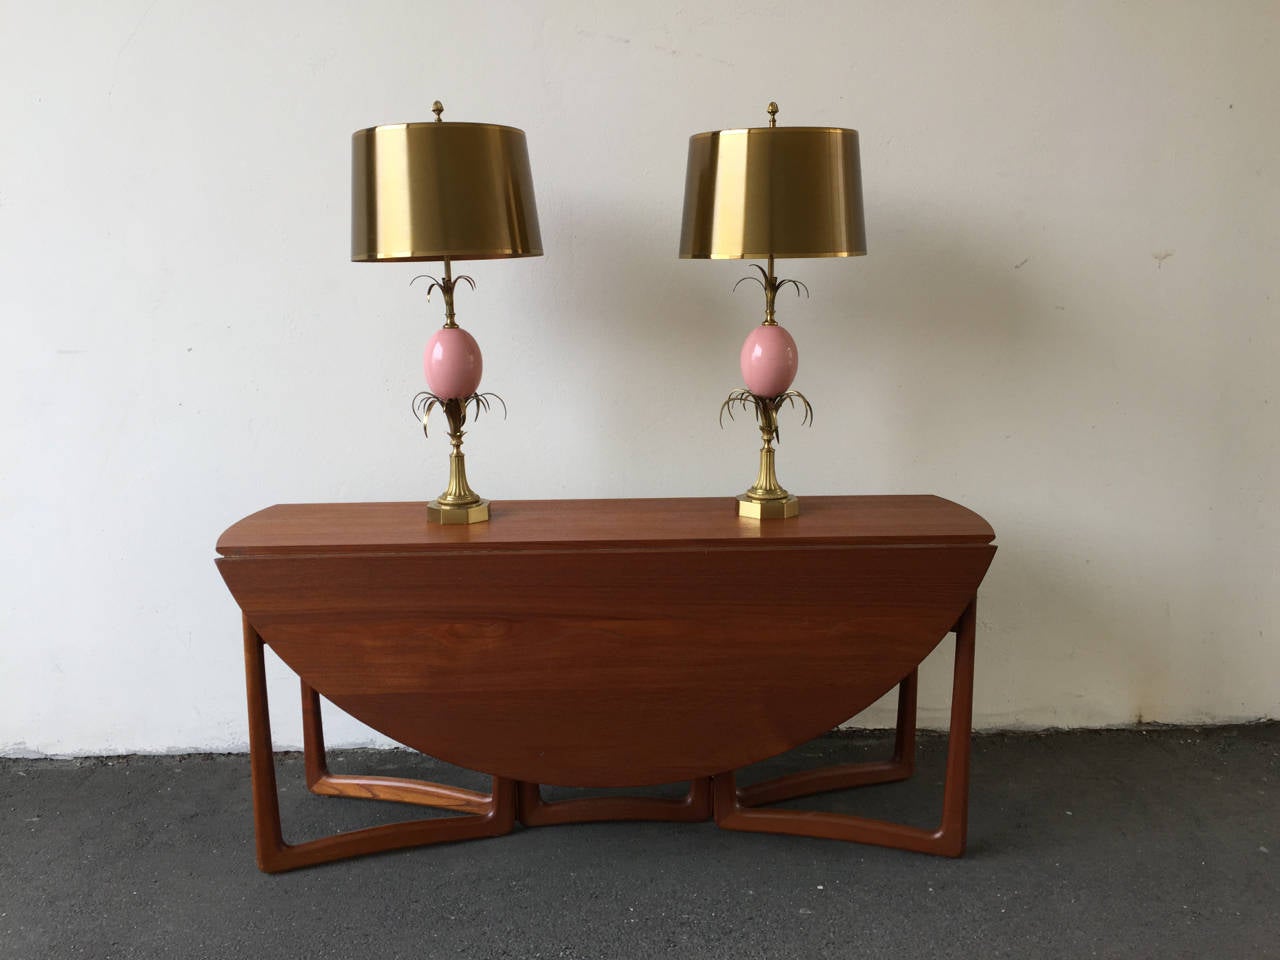 20th Century Rare Pair of Huge Maison Charles Ostrich Egg Table Lamps in Perfect Condition